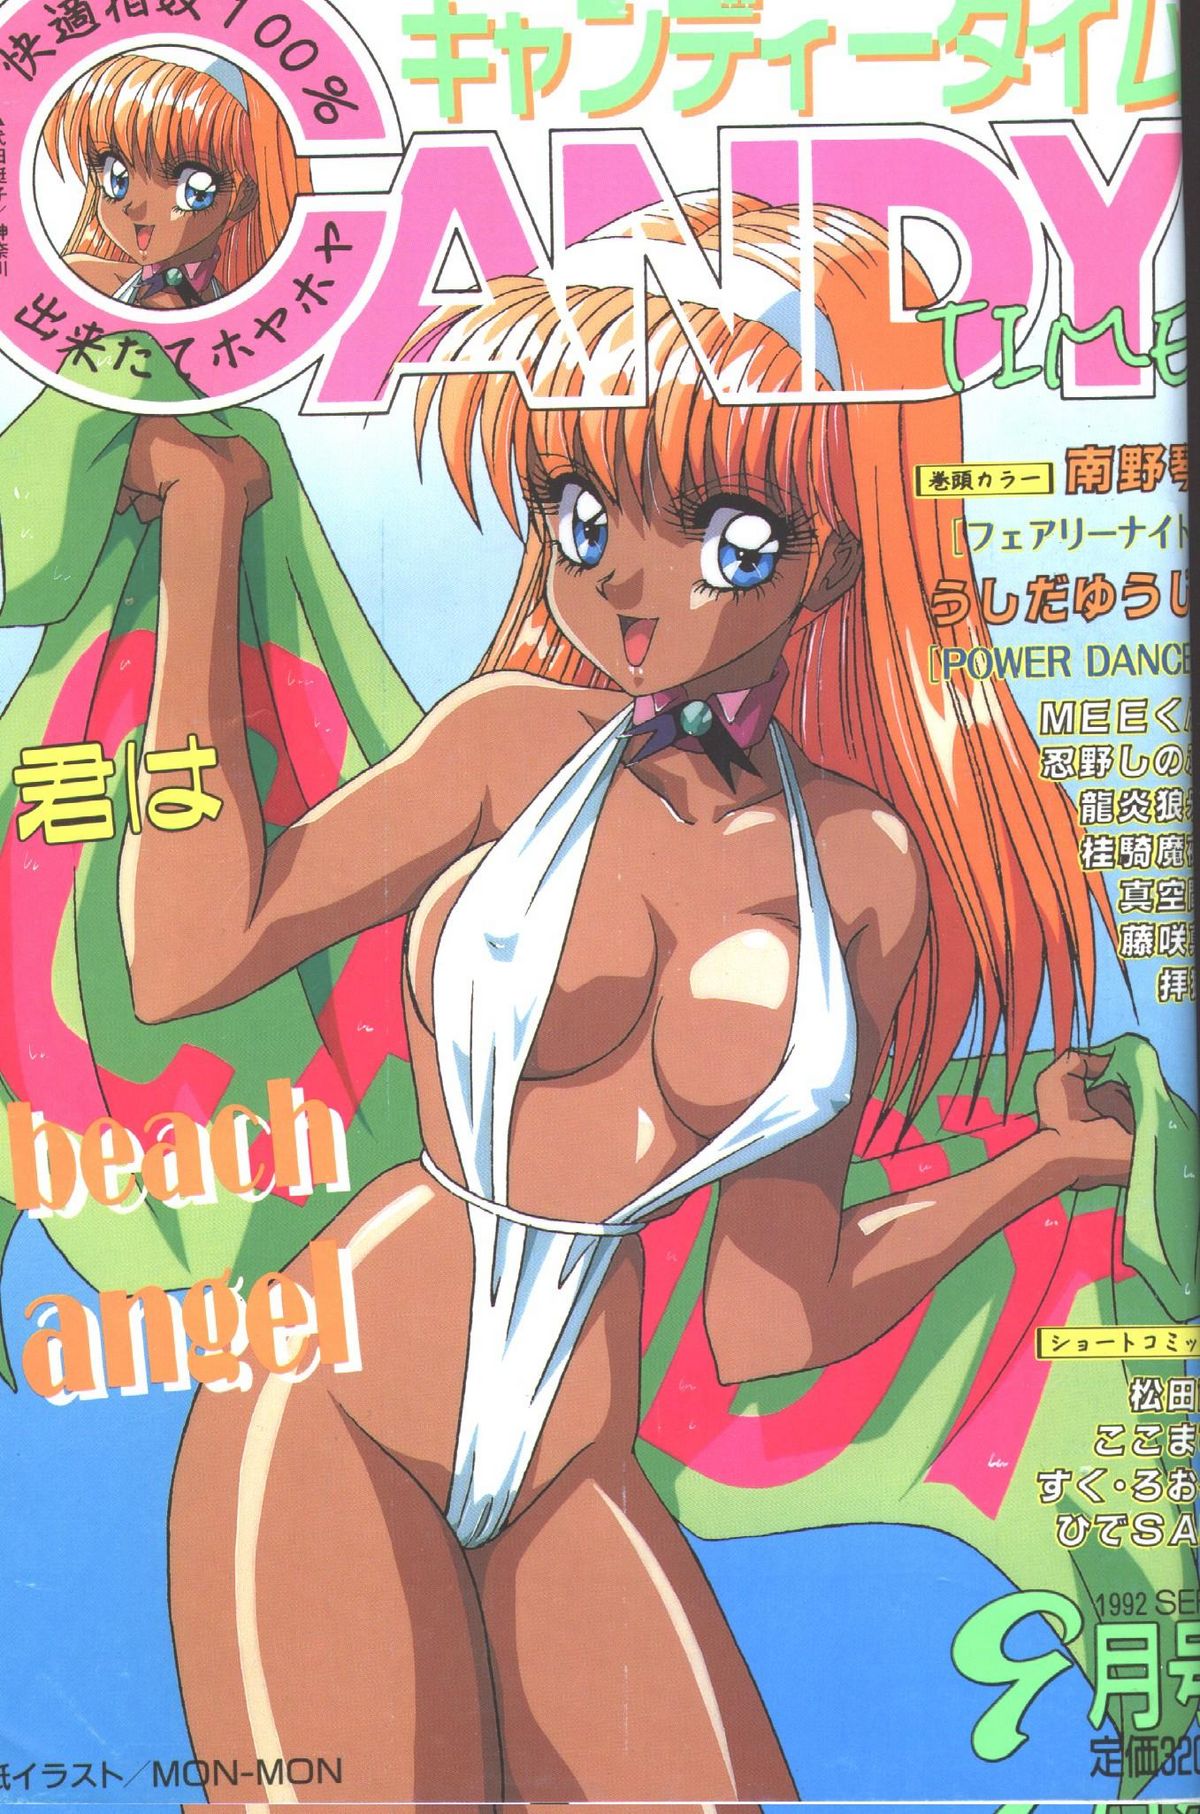 Candy Time 1992-09 [Incomplete] キャンディータイム 1992年09月号 [不完全]